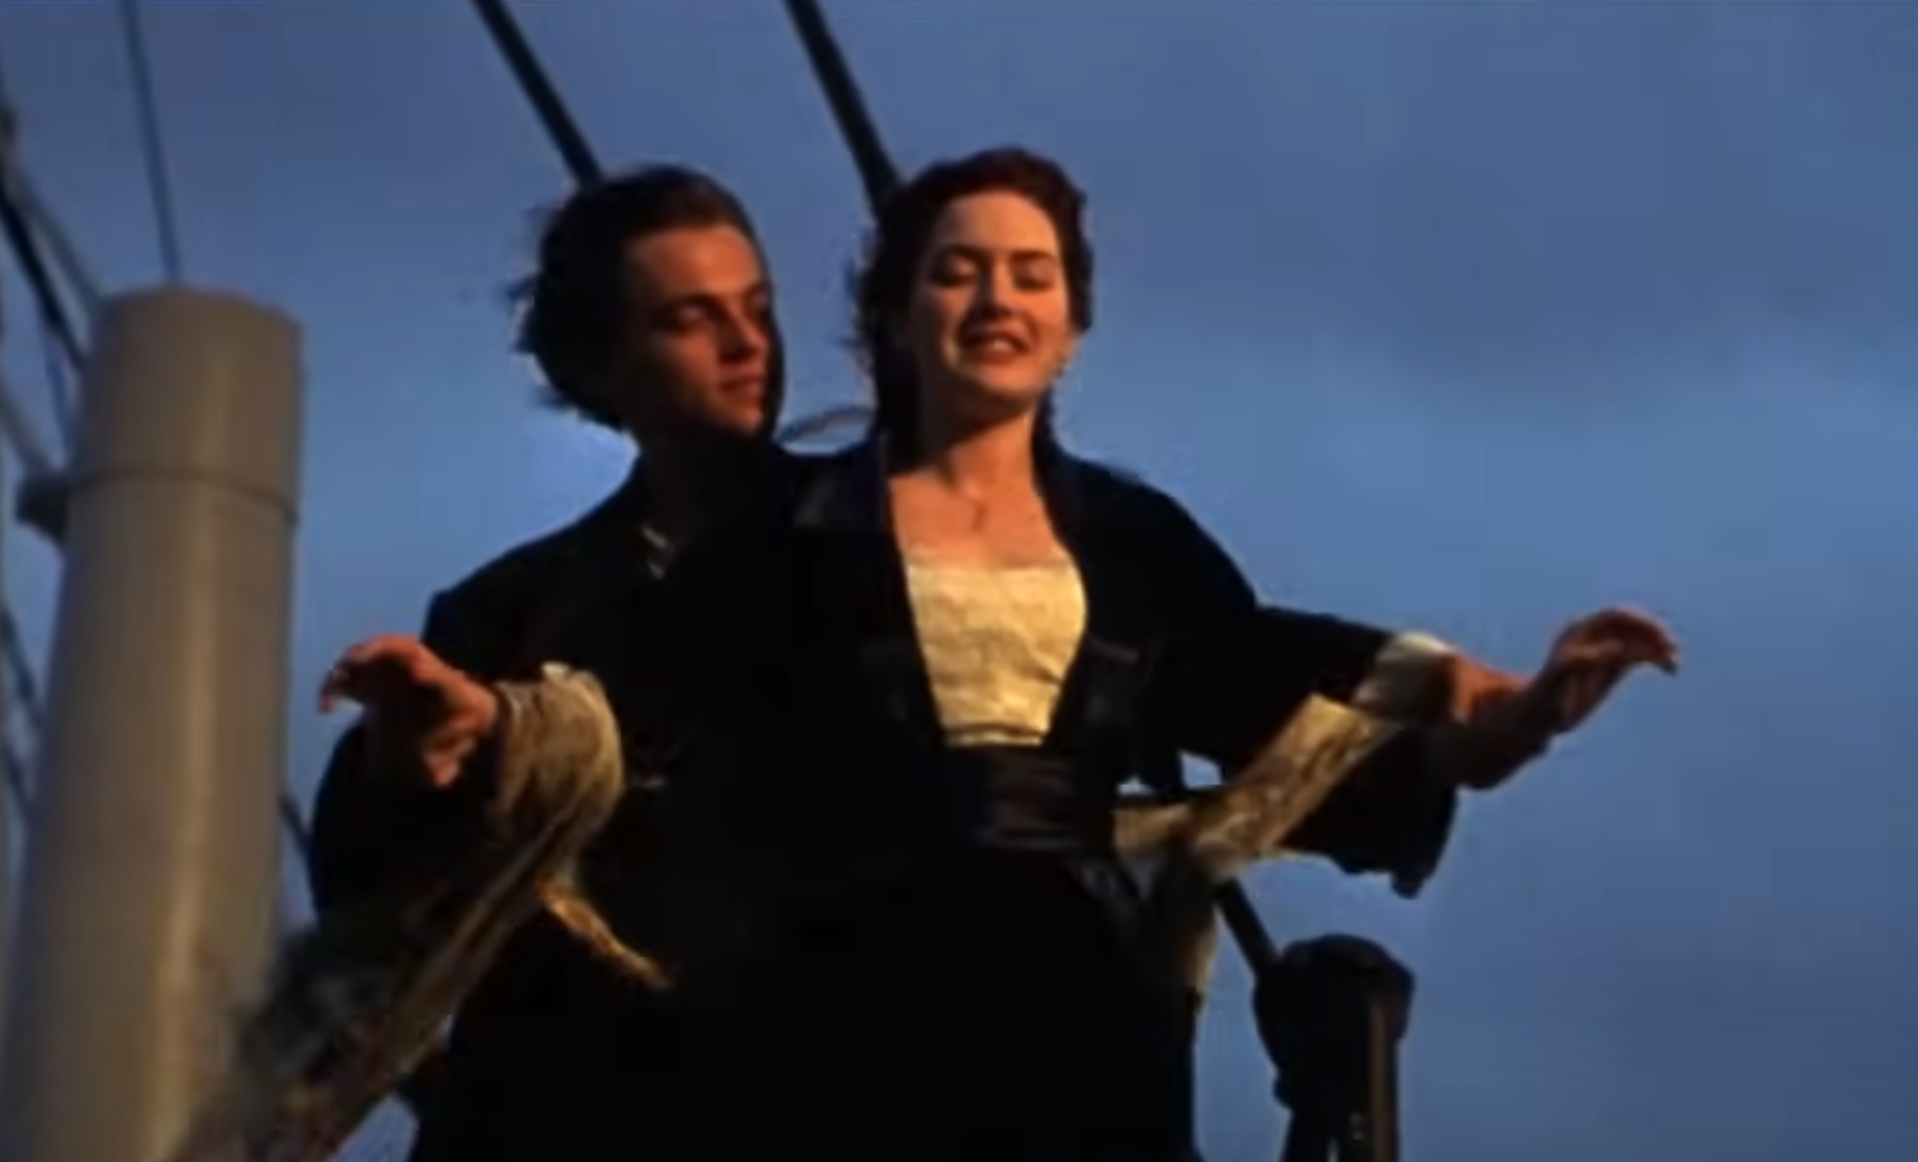 <p>While Jack and Rose were fictional characters in Titanic, the film also featured numerous real individuals. Here's a closer look at these 17 historical figures from the Titanic disaster.</p>